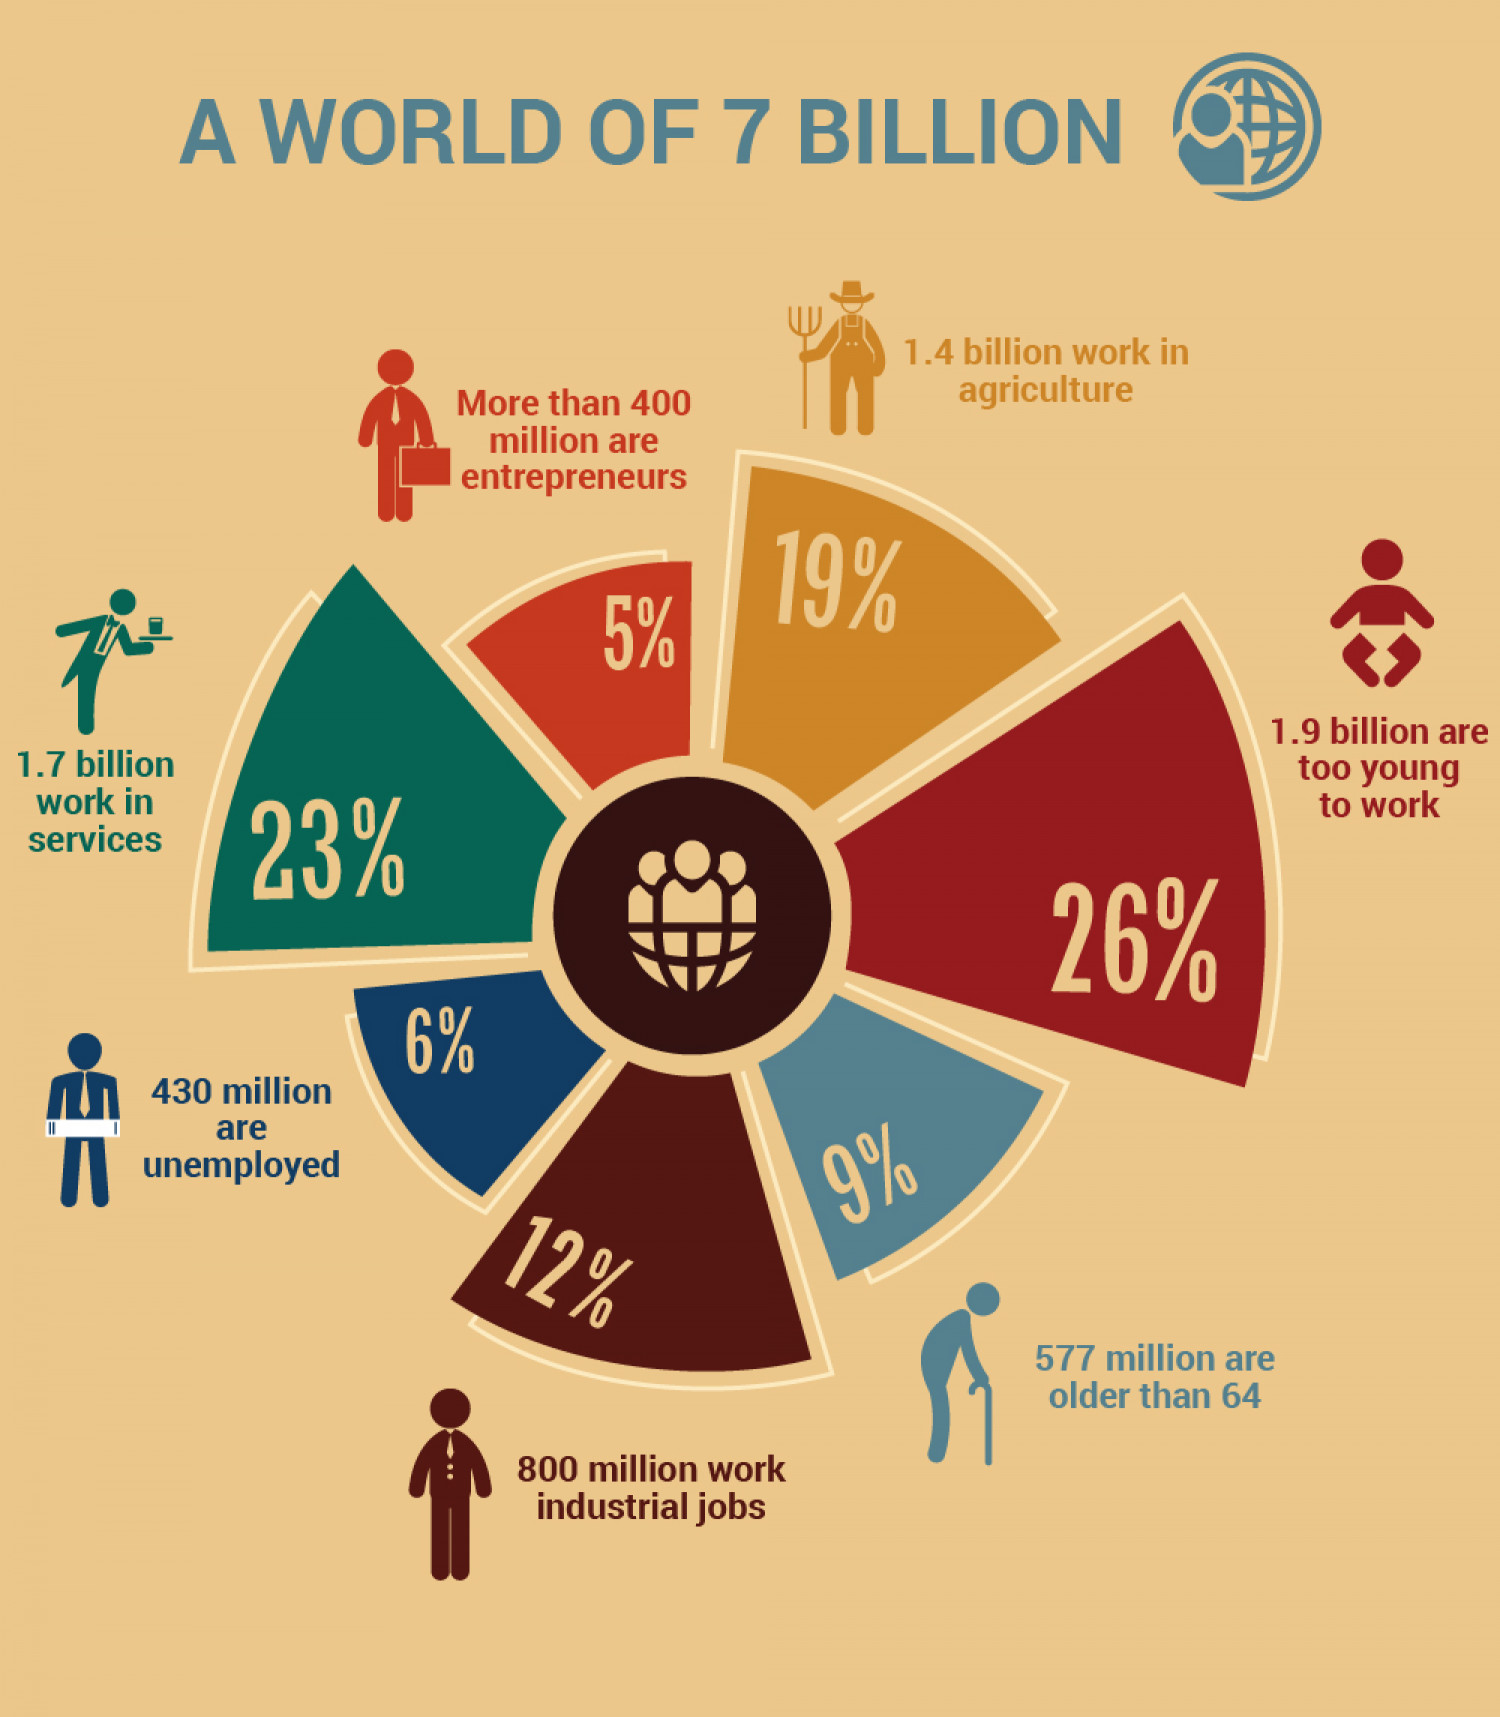 Activities of 7 Billion People in the World Infographic